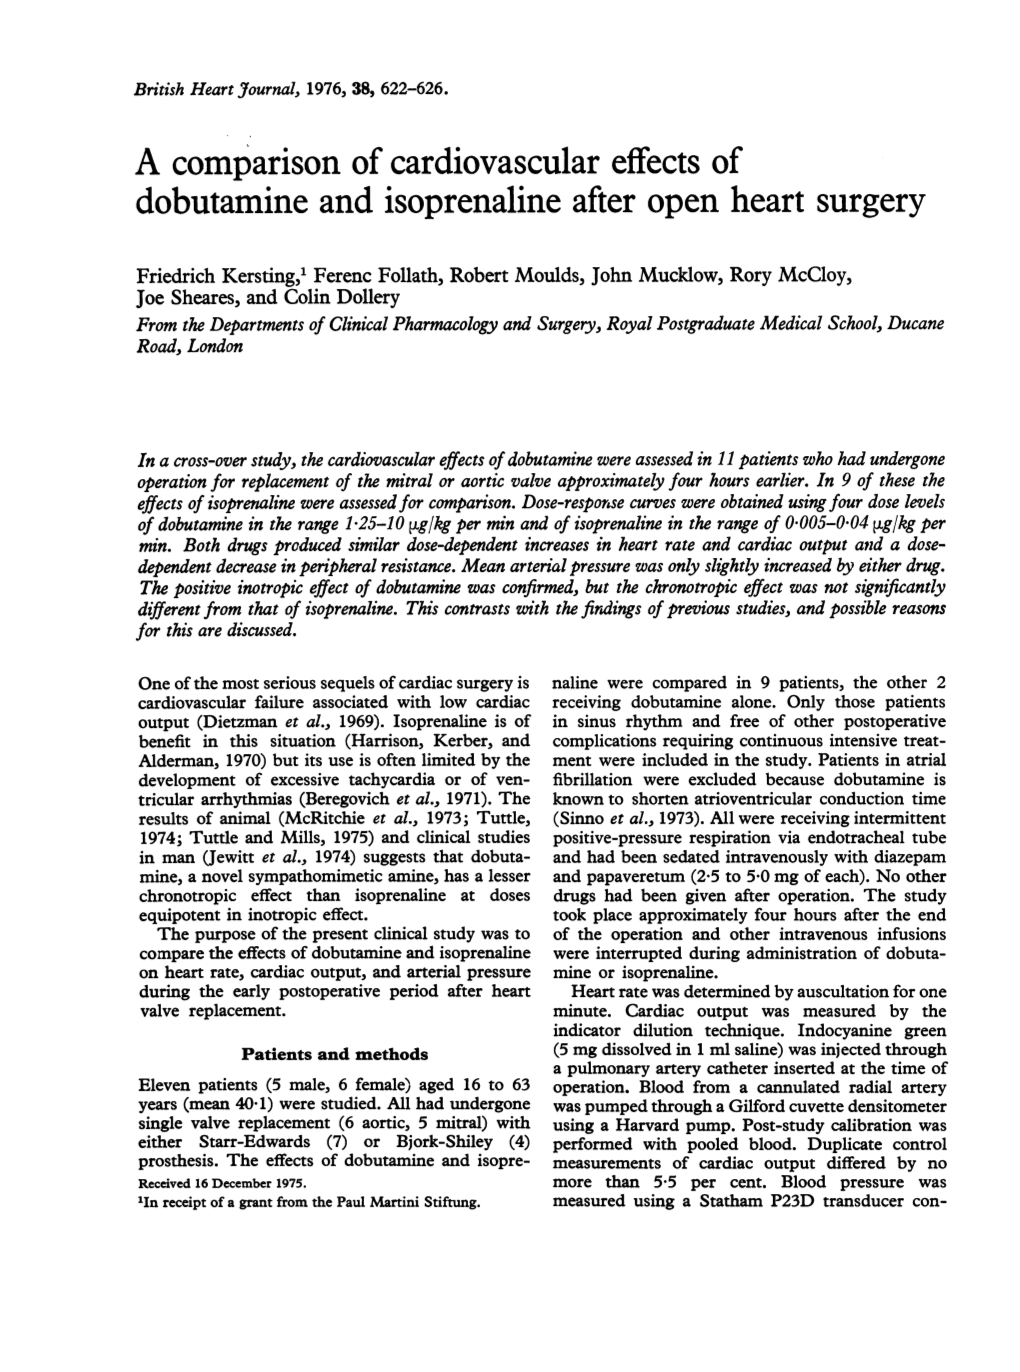 Dobutamine and Isoprenaline After Open Heart Surgery